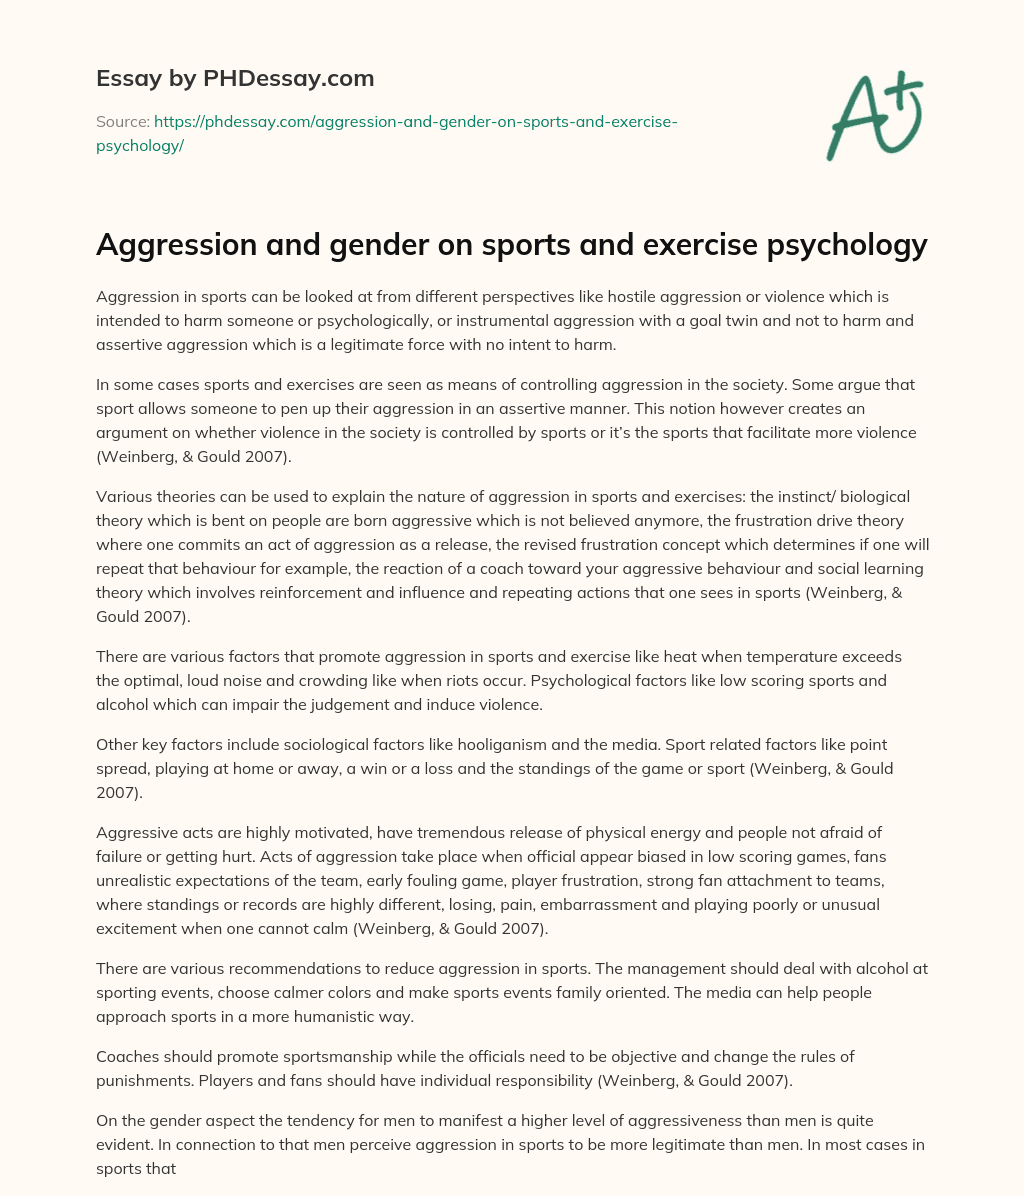 Aggression and gender on sports and exercise psychology essay